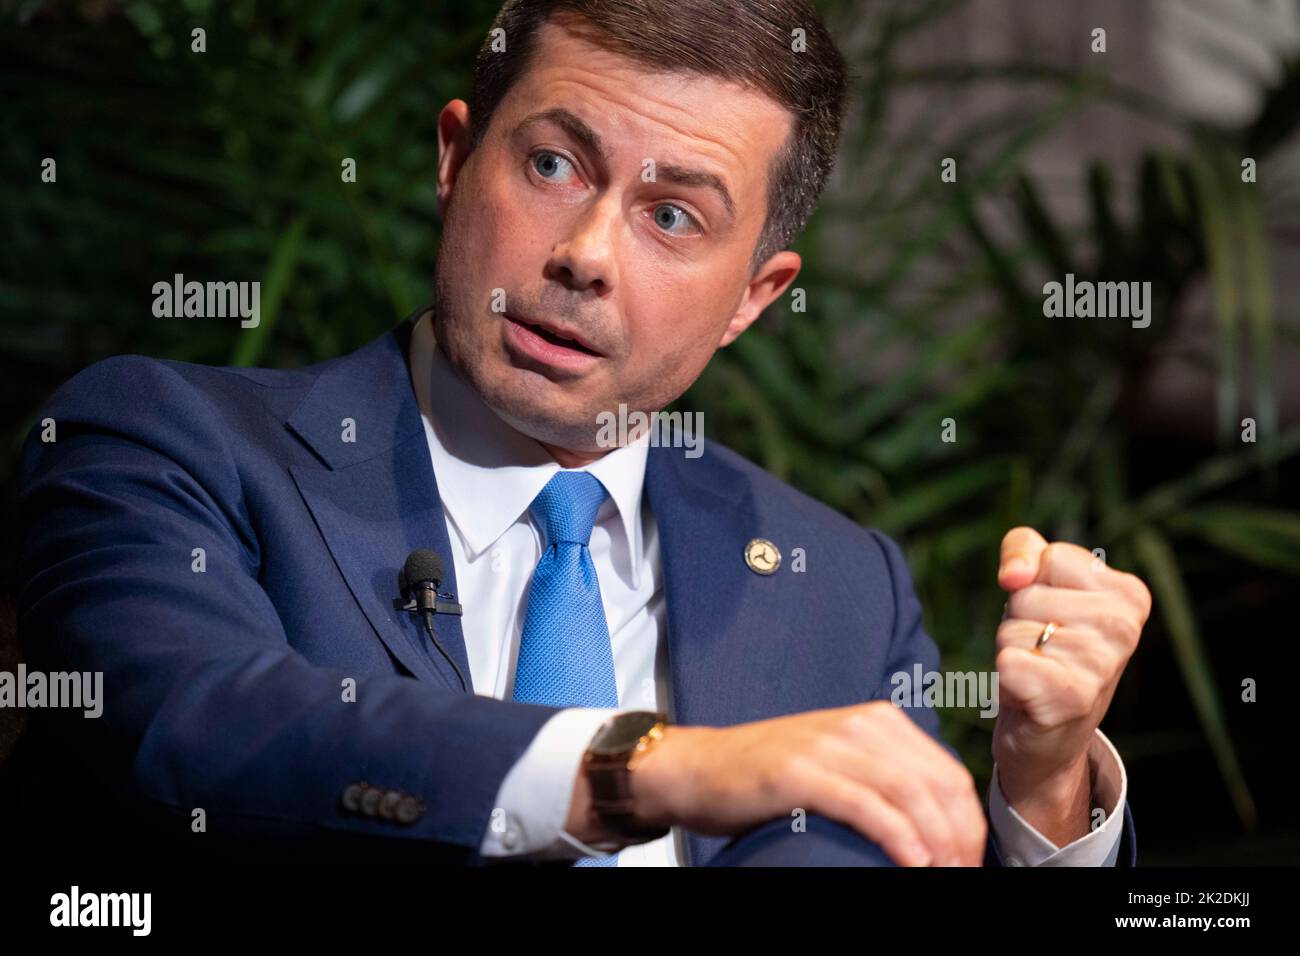 U.S. Transportation Secretary PETE BUTTIGIEG opens the 2022 Texas Tribune Festival with a sit-down interview with Tribune editor Evan Smith (not shown) at the historic Paramount Theater in downtown Austin. Buttigieg is the first openly gay Cabinet member in U.S. history. Credit: Bob Daemmrich/Alamy Live News Stock Photo